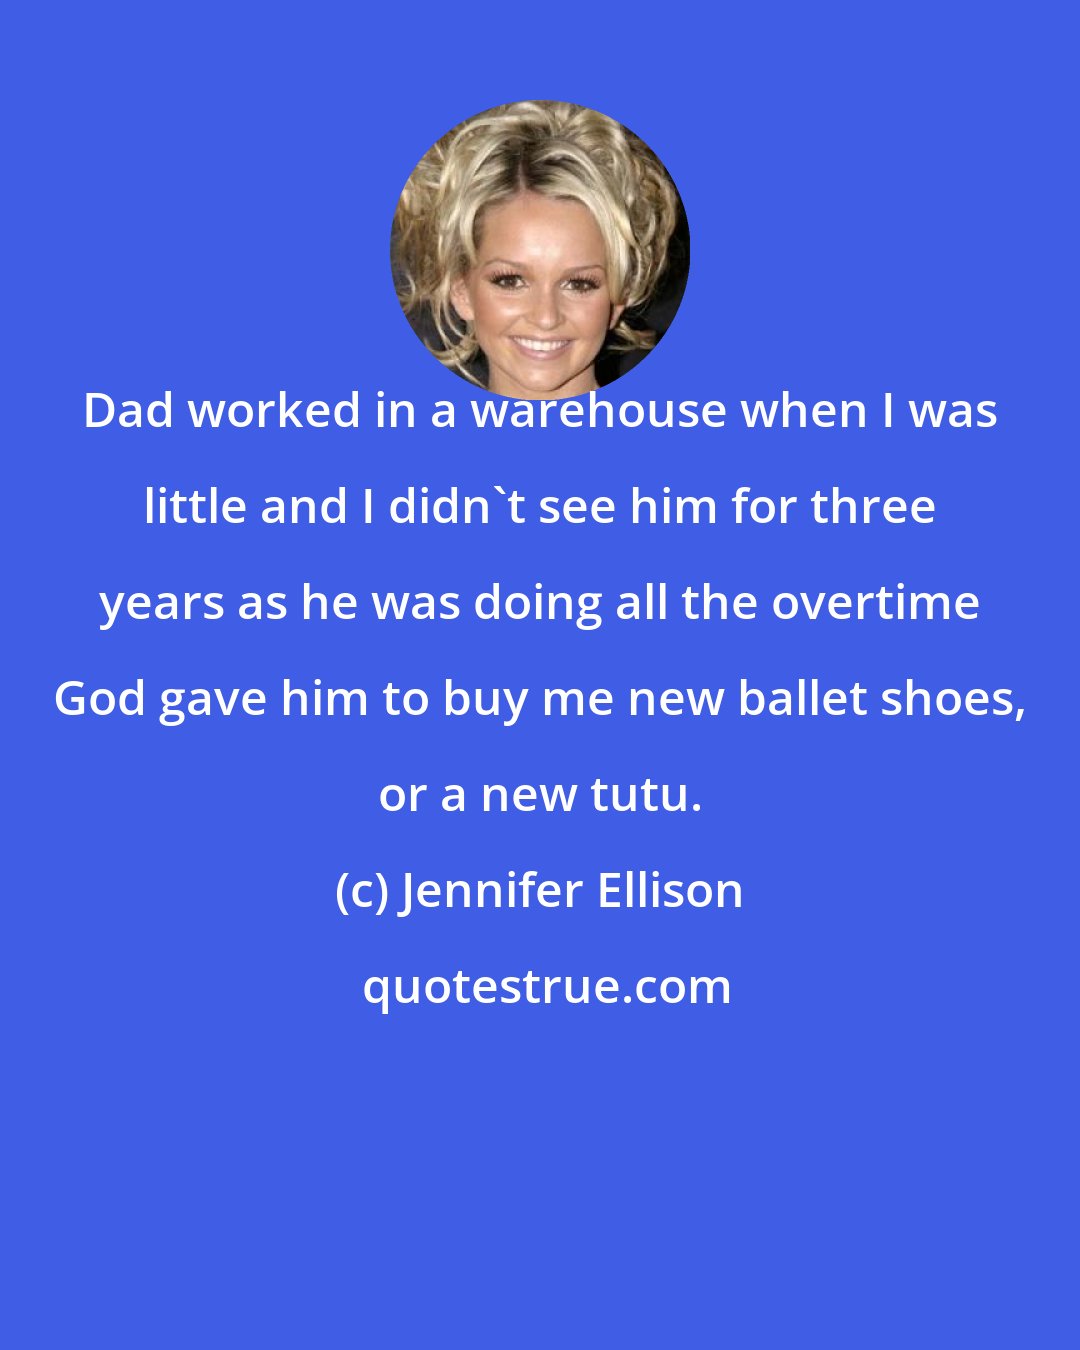 Jennifer Ellison: Dad worked in a warehouse when I was little and I didn't see him for three years as he was doing all the overtime God gave him to buy me new ballet shoes, or a new tutu.